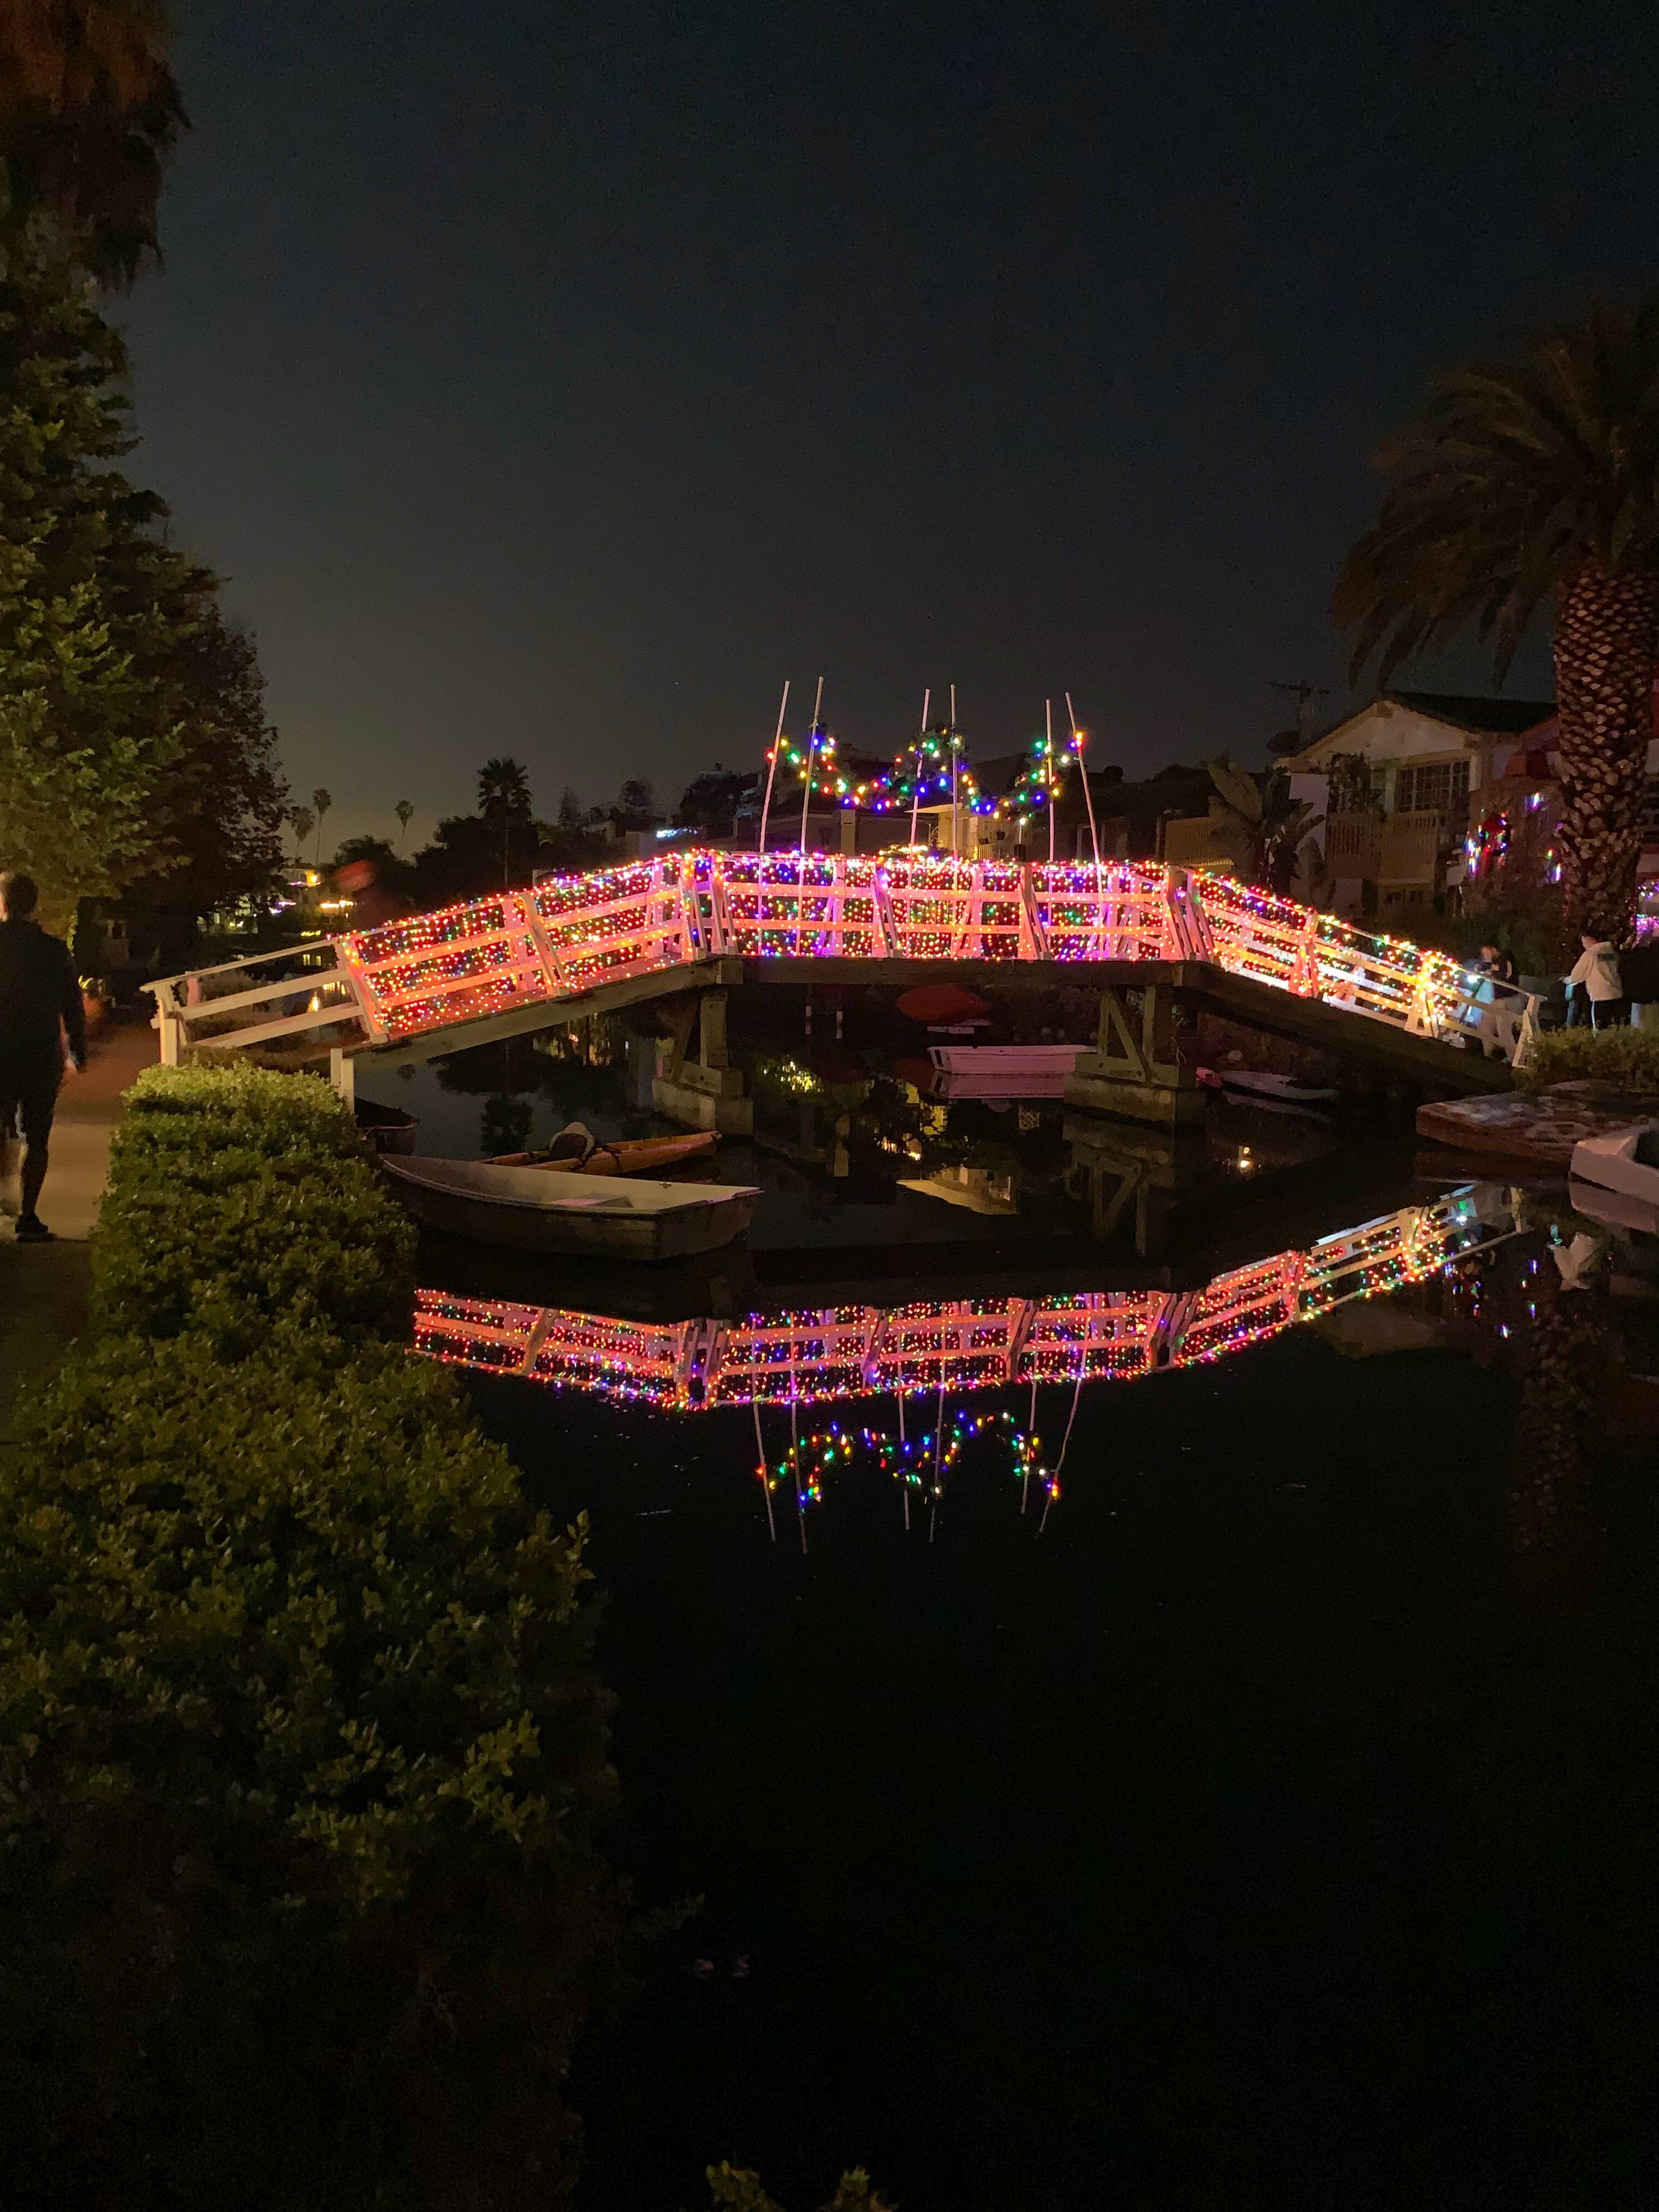 Christmas Lights in Los Angeles Venice Canals - Bridge Decorations